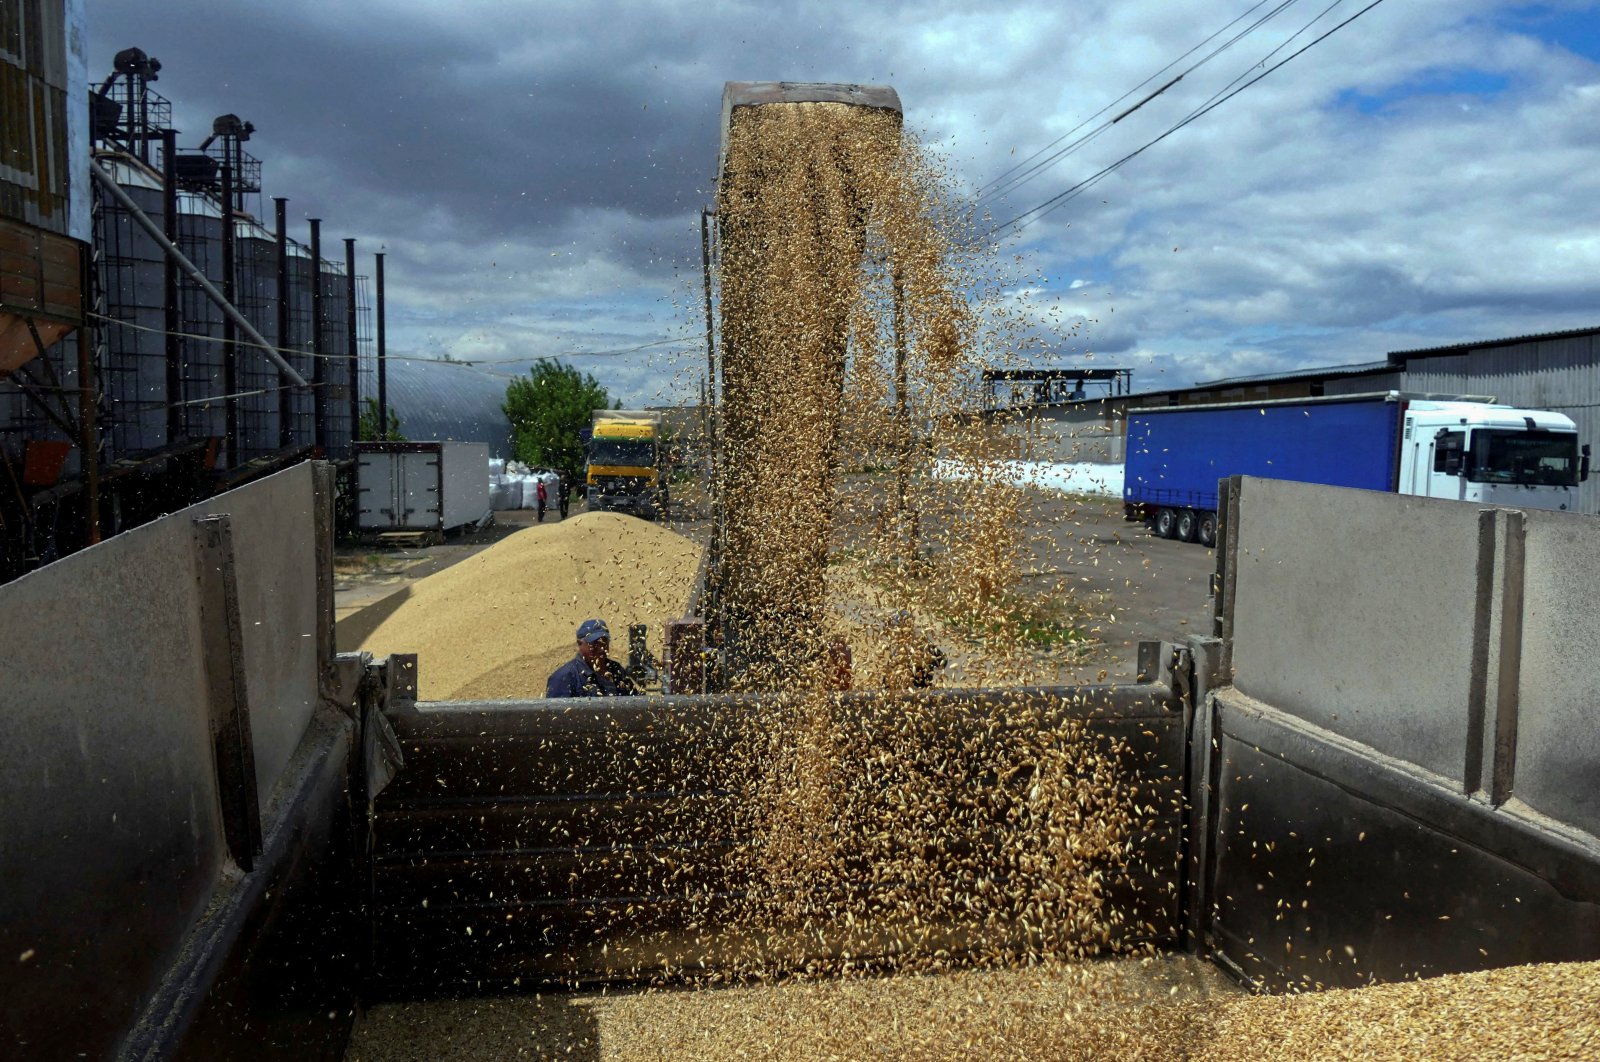  A worker loads a truck with grain at a terminal during barley harvesting in Odessa region, as Russia&#039;s attacks on Ukraine continues, Ukraine June 23, 2022. (Reuters File Photo)